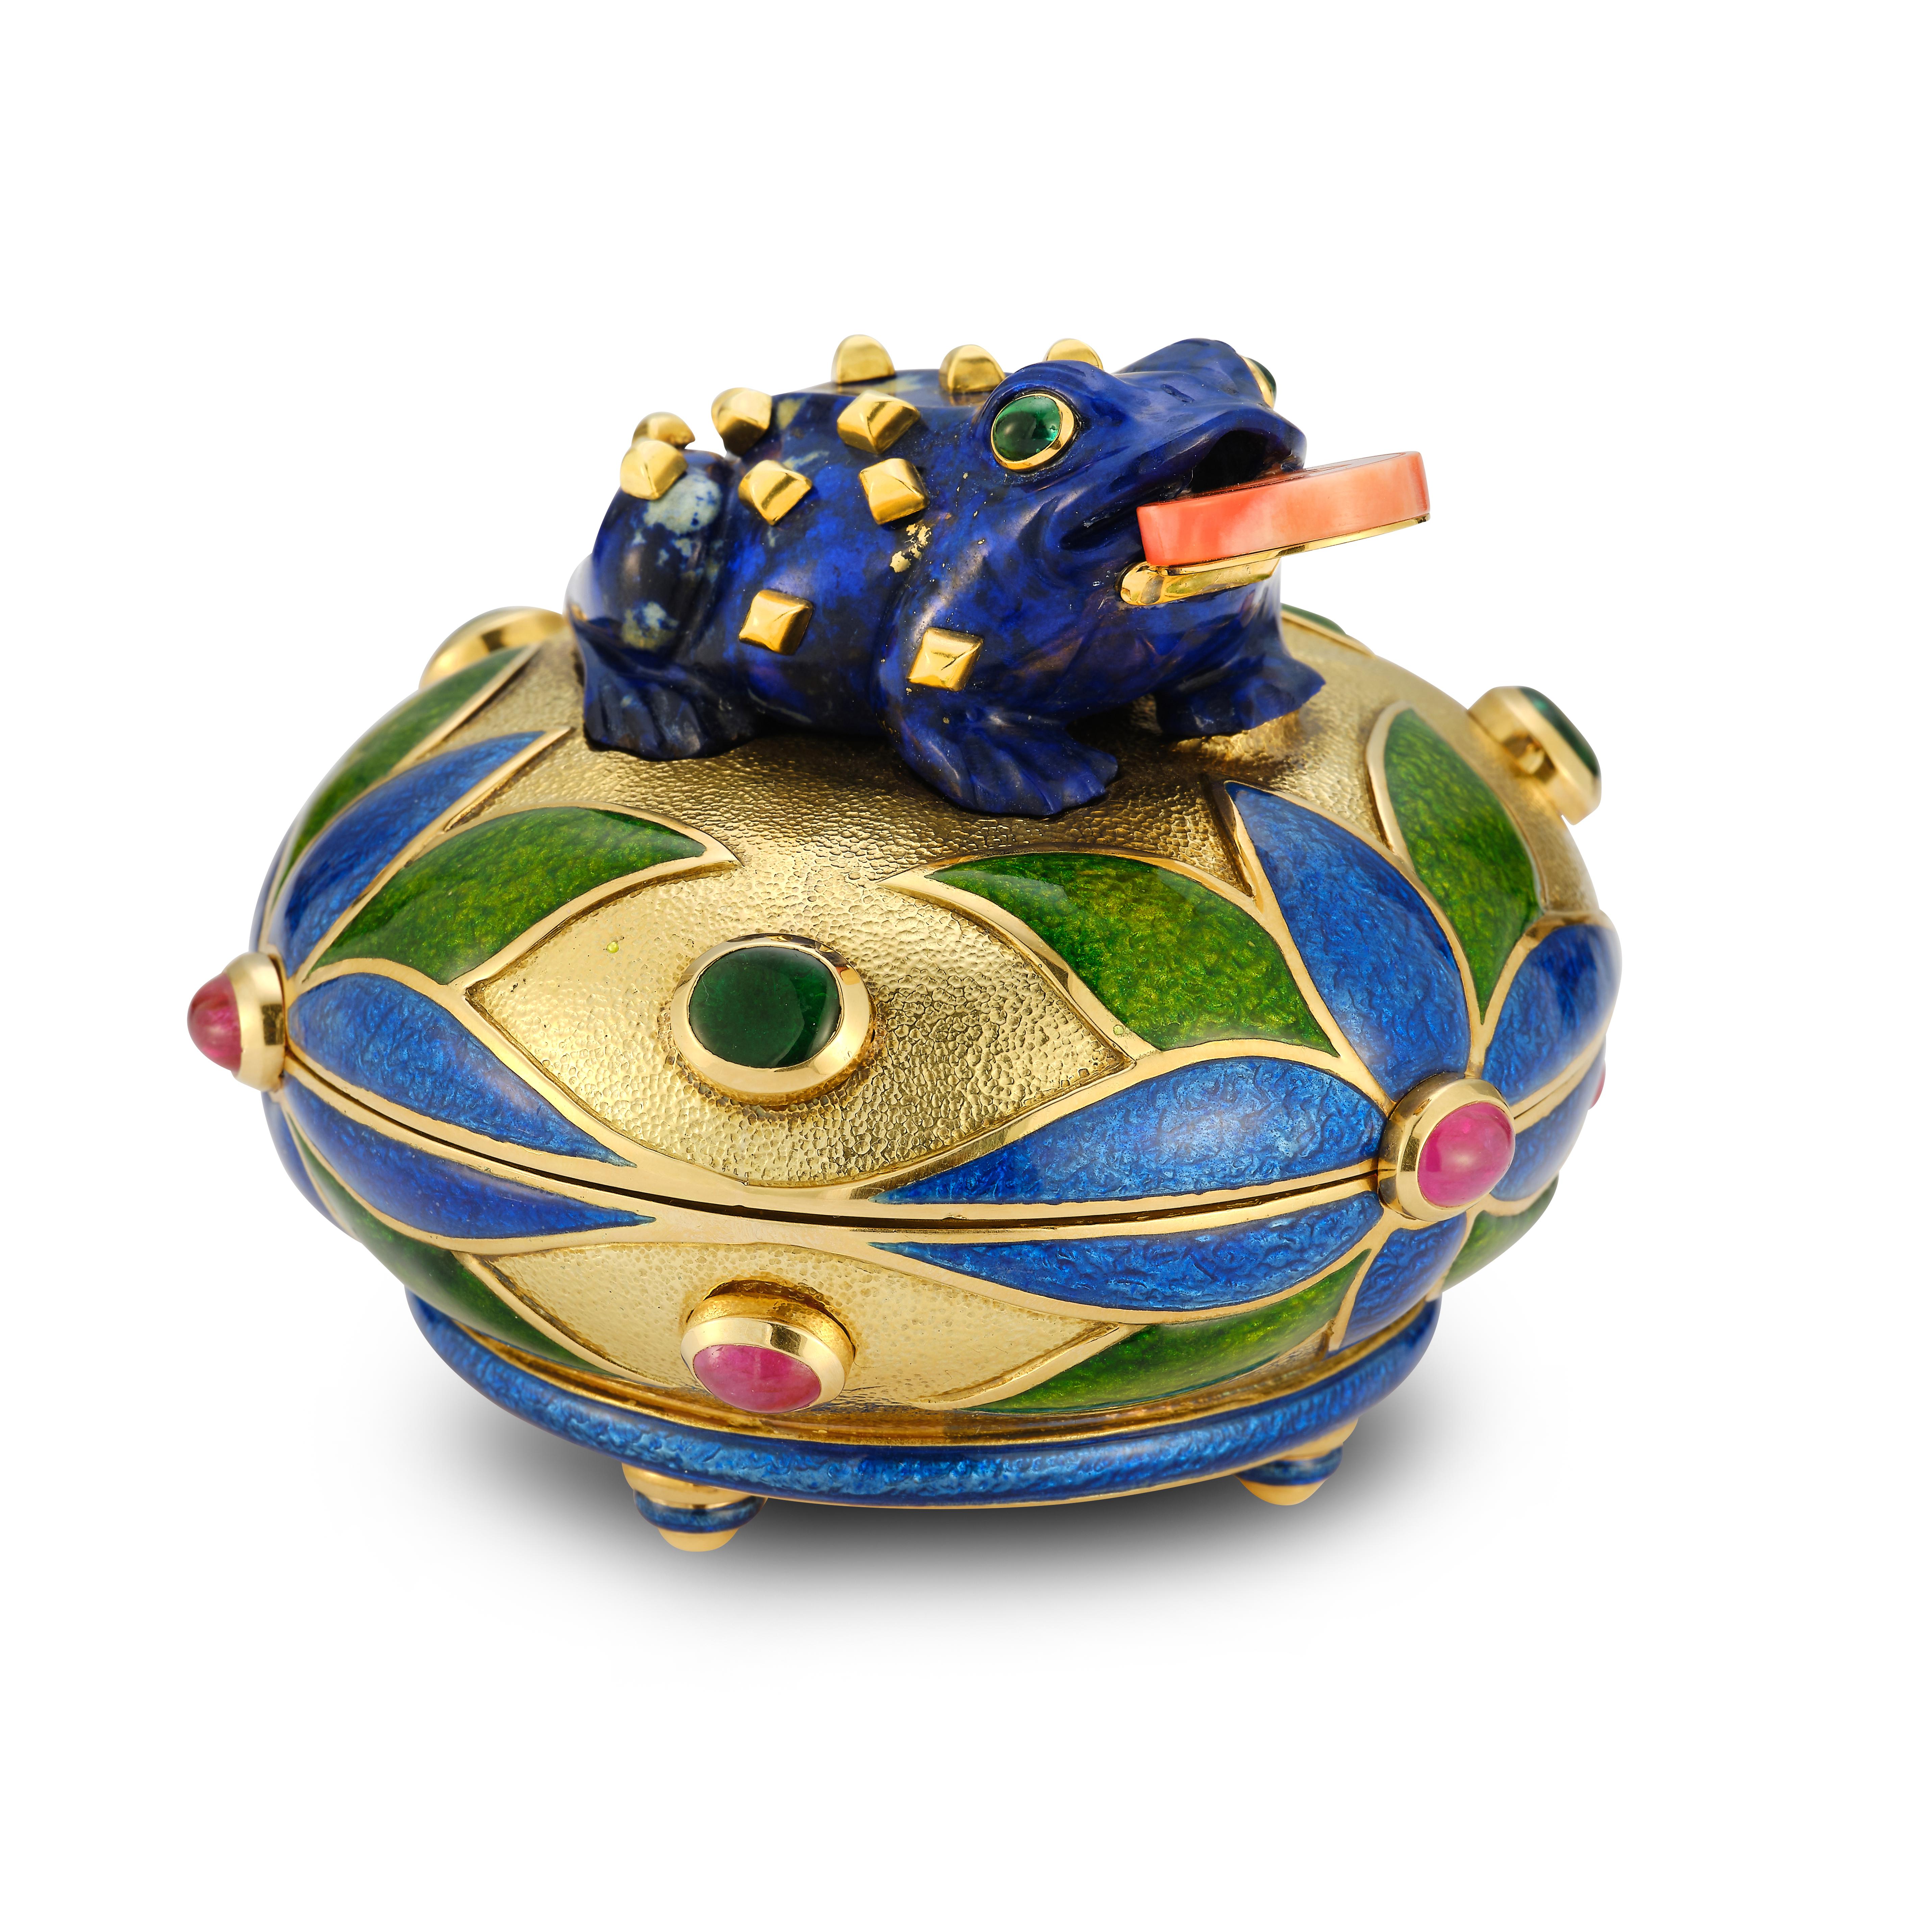 David Webb Multi Gem and Enamel Gold Frog Bowl

A gold bowl topped by a lapis lazuli frog with a coral tongue
Set with 6 cabochon rubies, 5 cabochon emeralds, 3 blue and green enamel flower designs

Ruby weight: 11.26ct
Emerald weight: